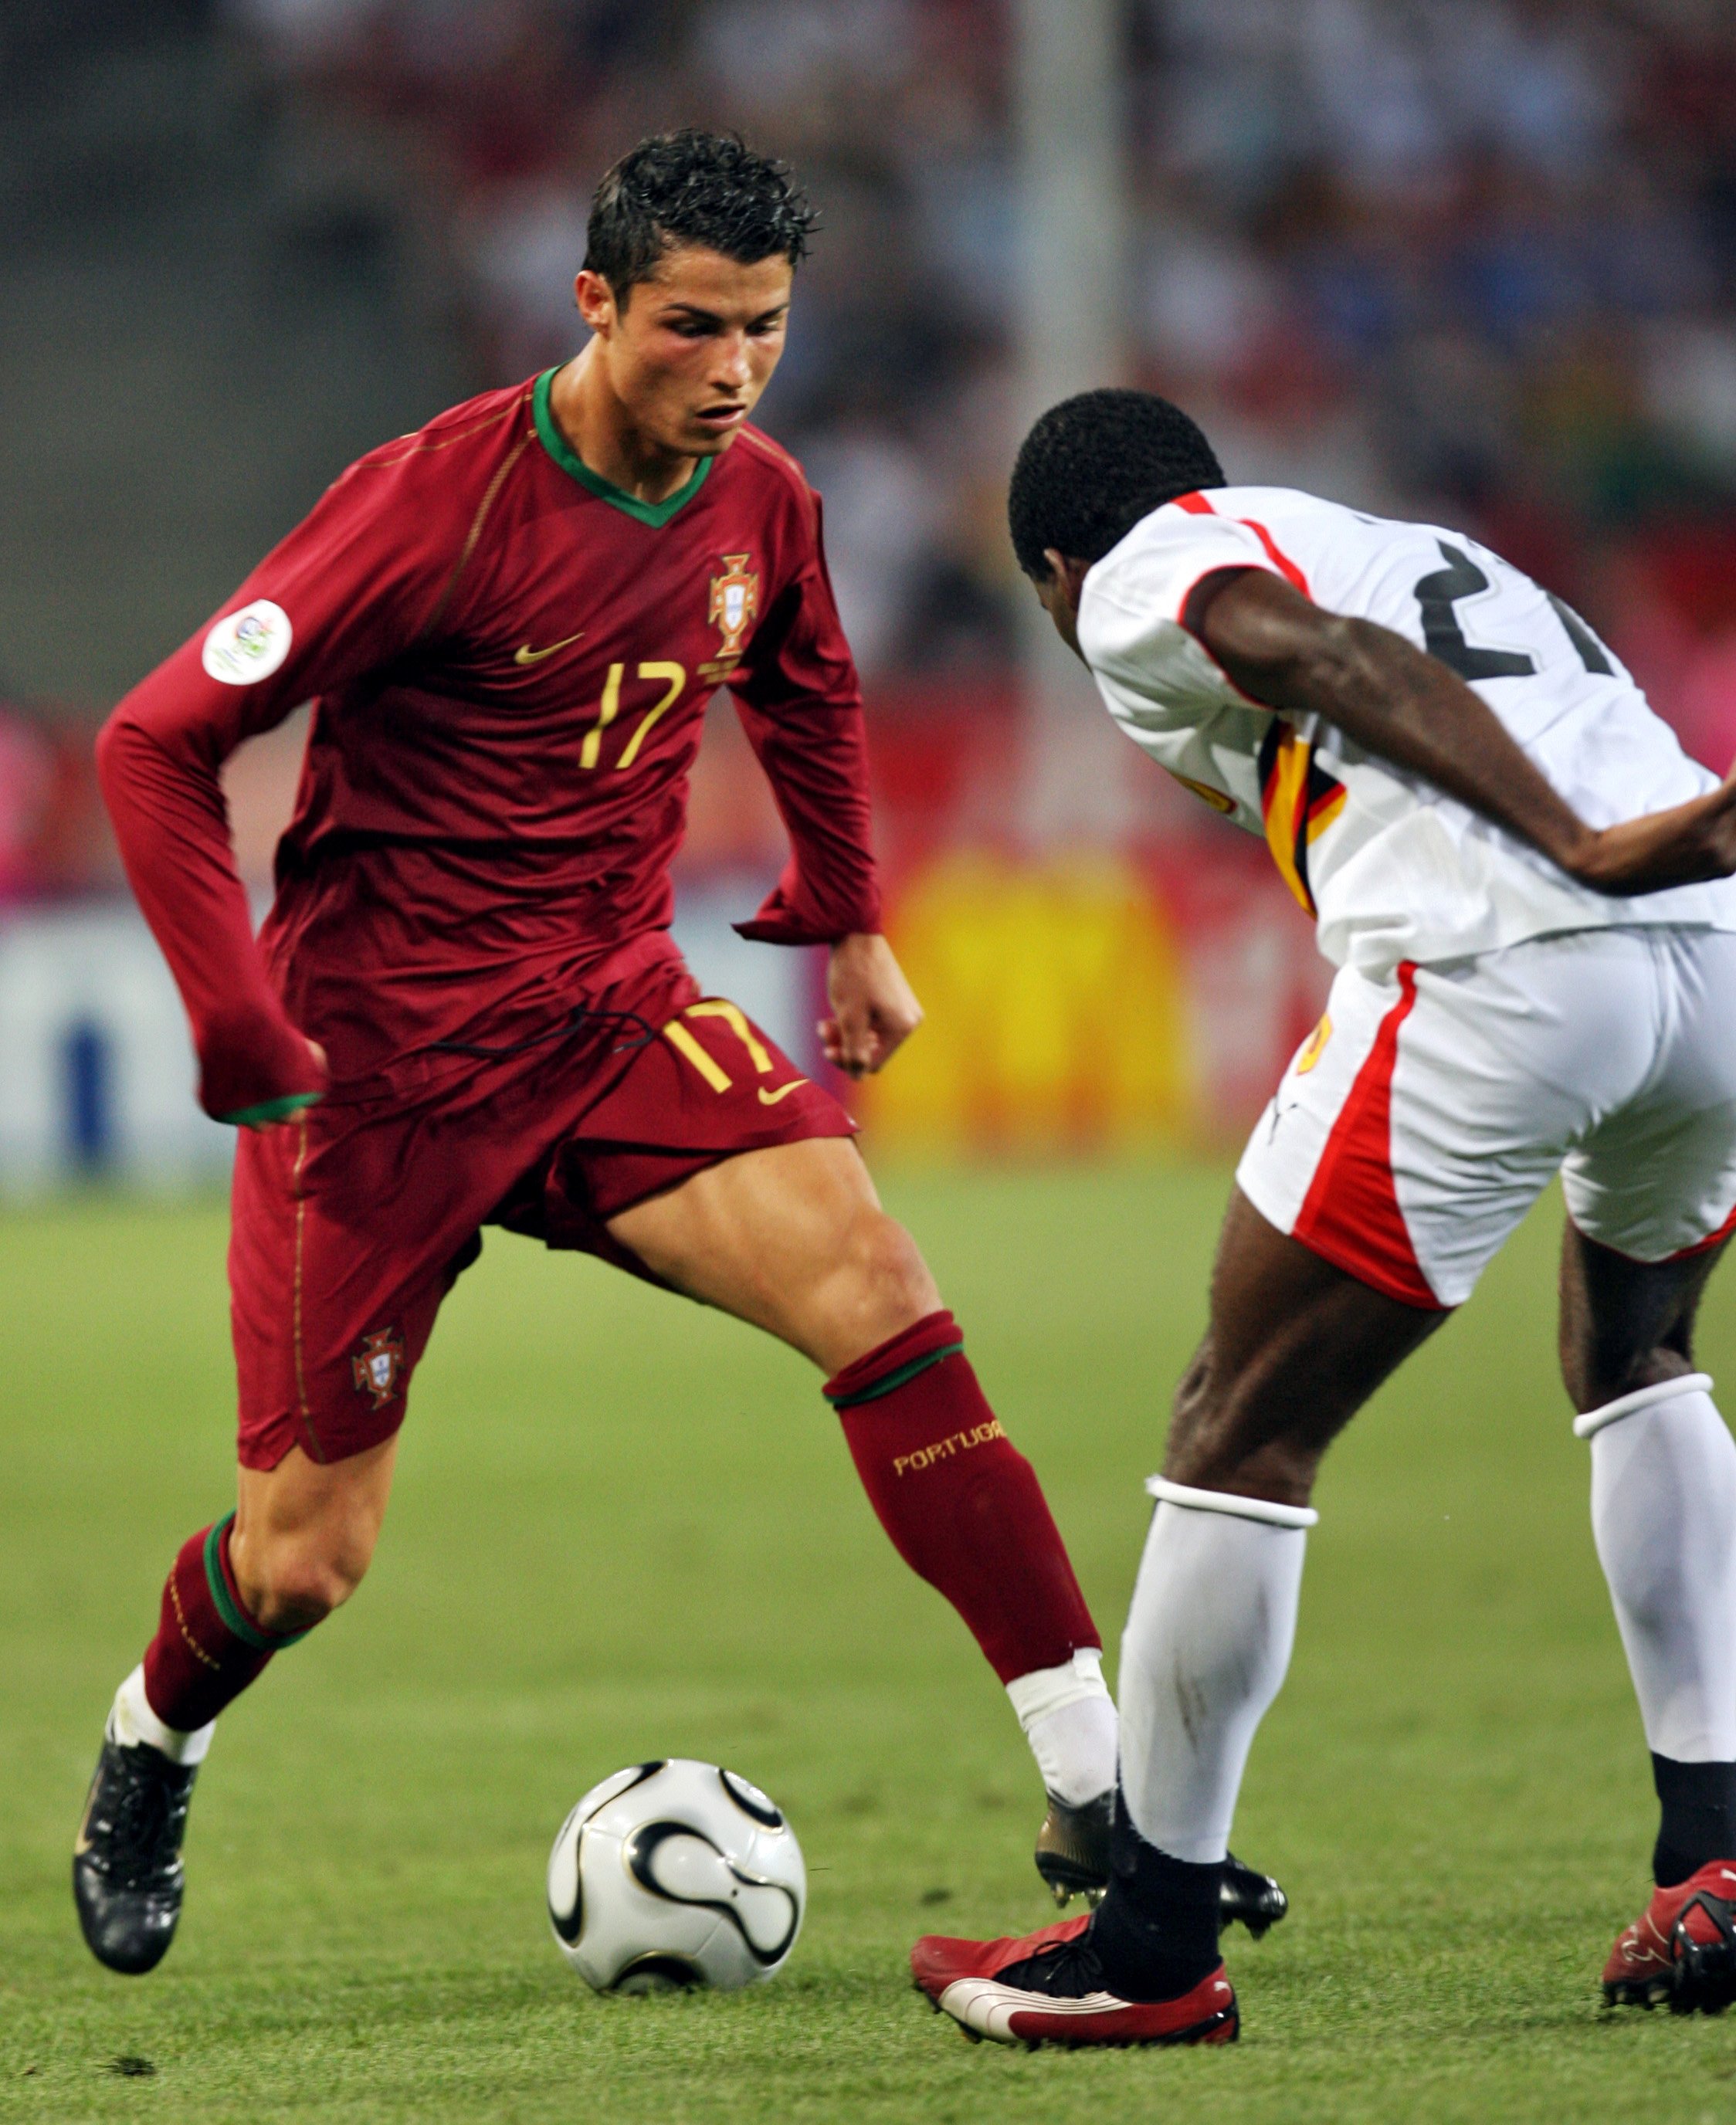 TCR. on X: "Cristiano Ronaldo in his World Cup debut, 2006 against Angola  in Portugal's first group stage match. https://t.co/UAKBXkeg4P" / X